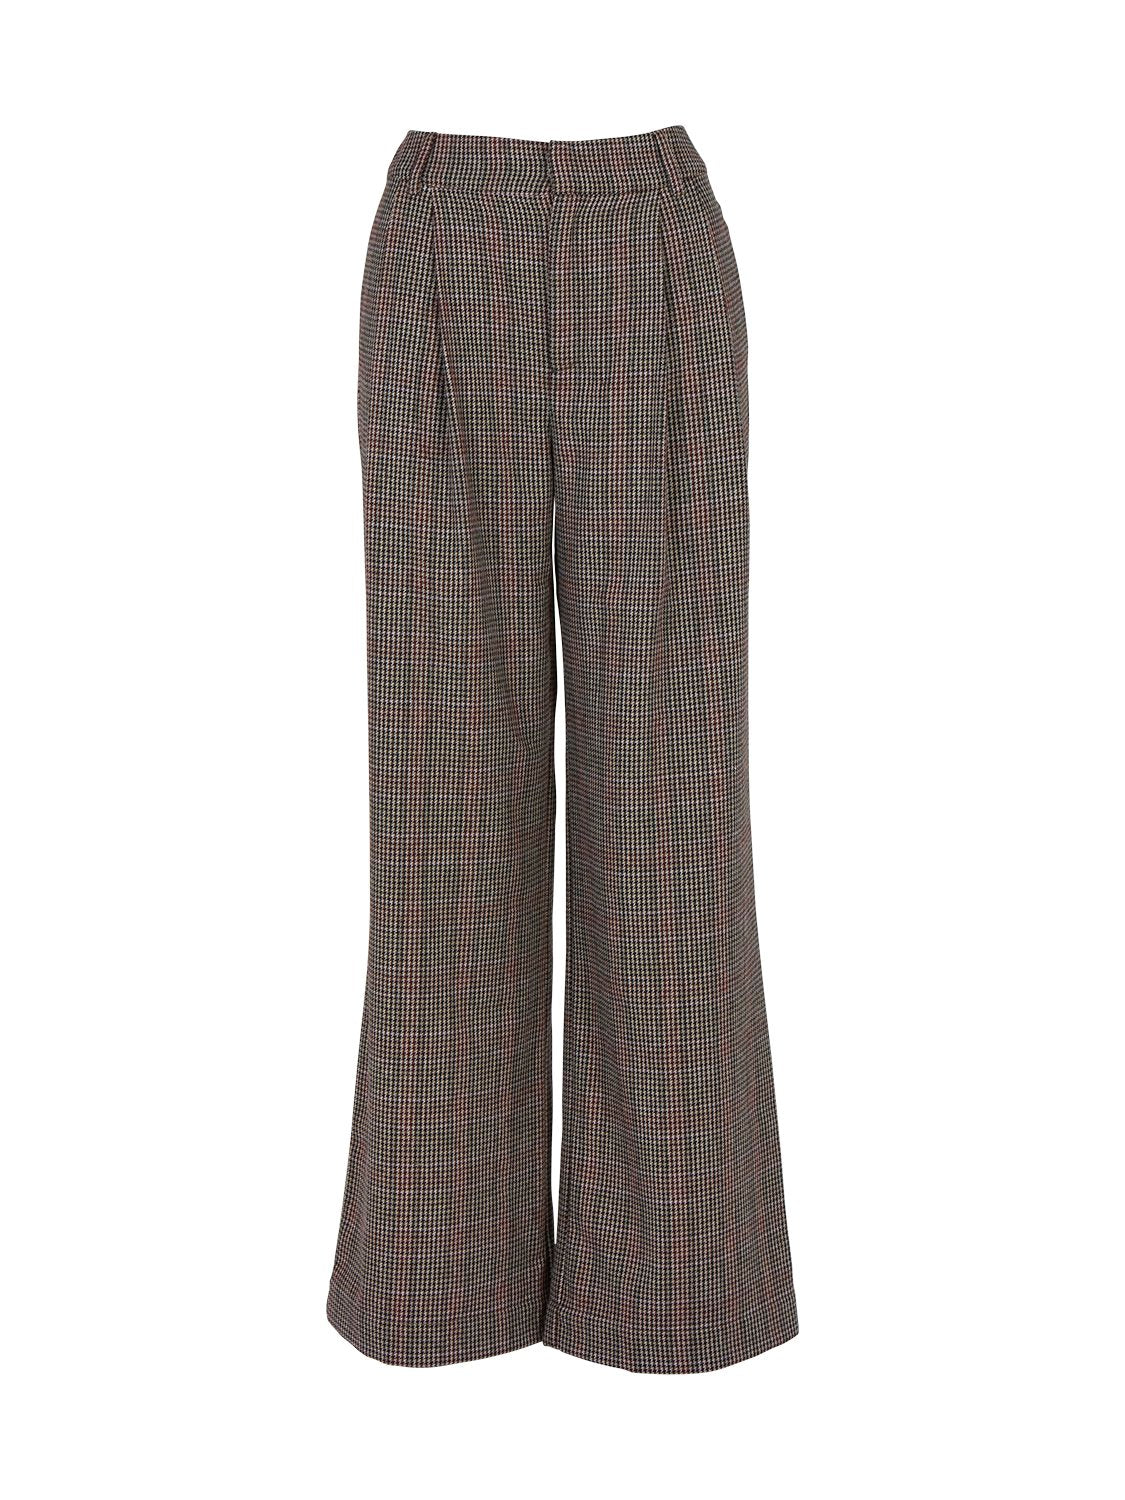 Holland Tailored Pant - Ginger Check